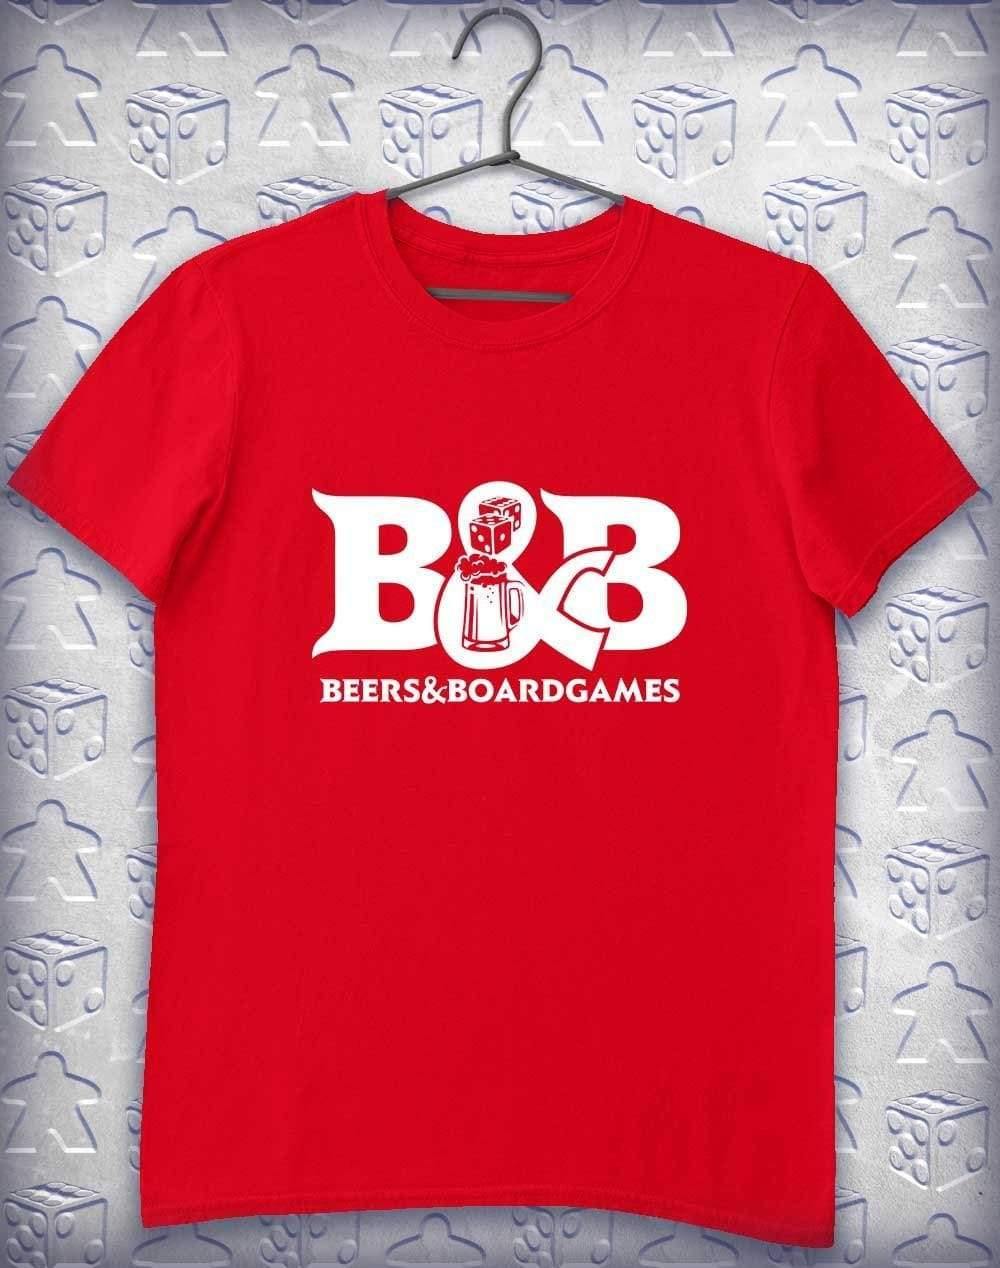 B&B Beers and Boardgames T-Shirt S / Red  - Off World Tees